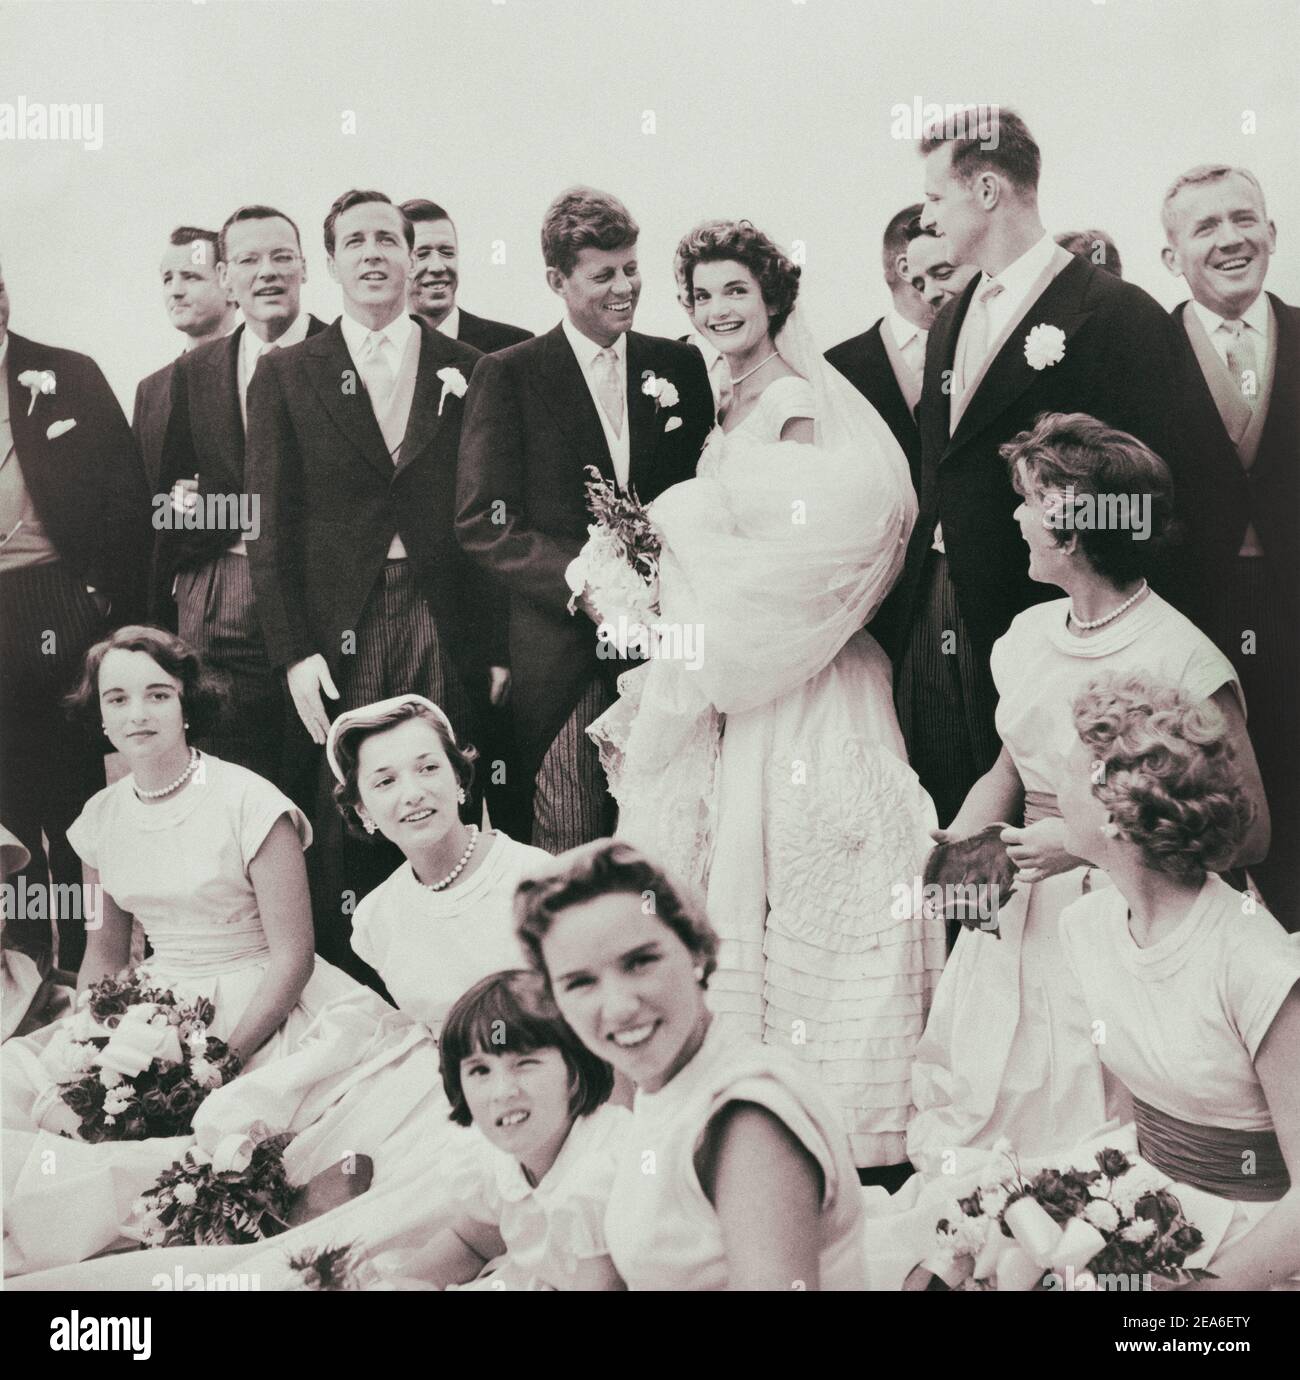 Jackie Bouvier and Jack Kennedy, in wedding attire, with members of the wedding party. September 12, 1953, Newport, Rhode Island Stock Photo